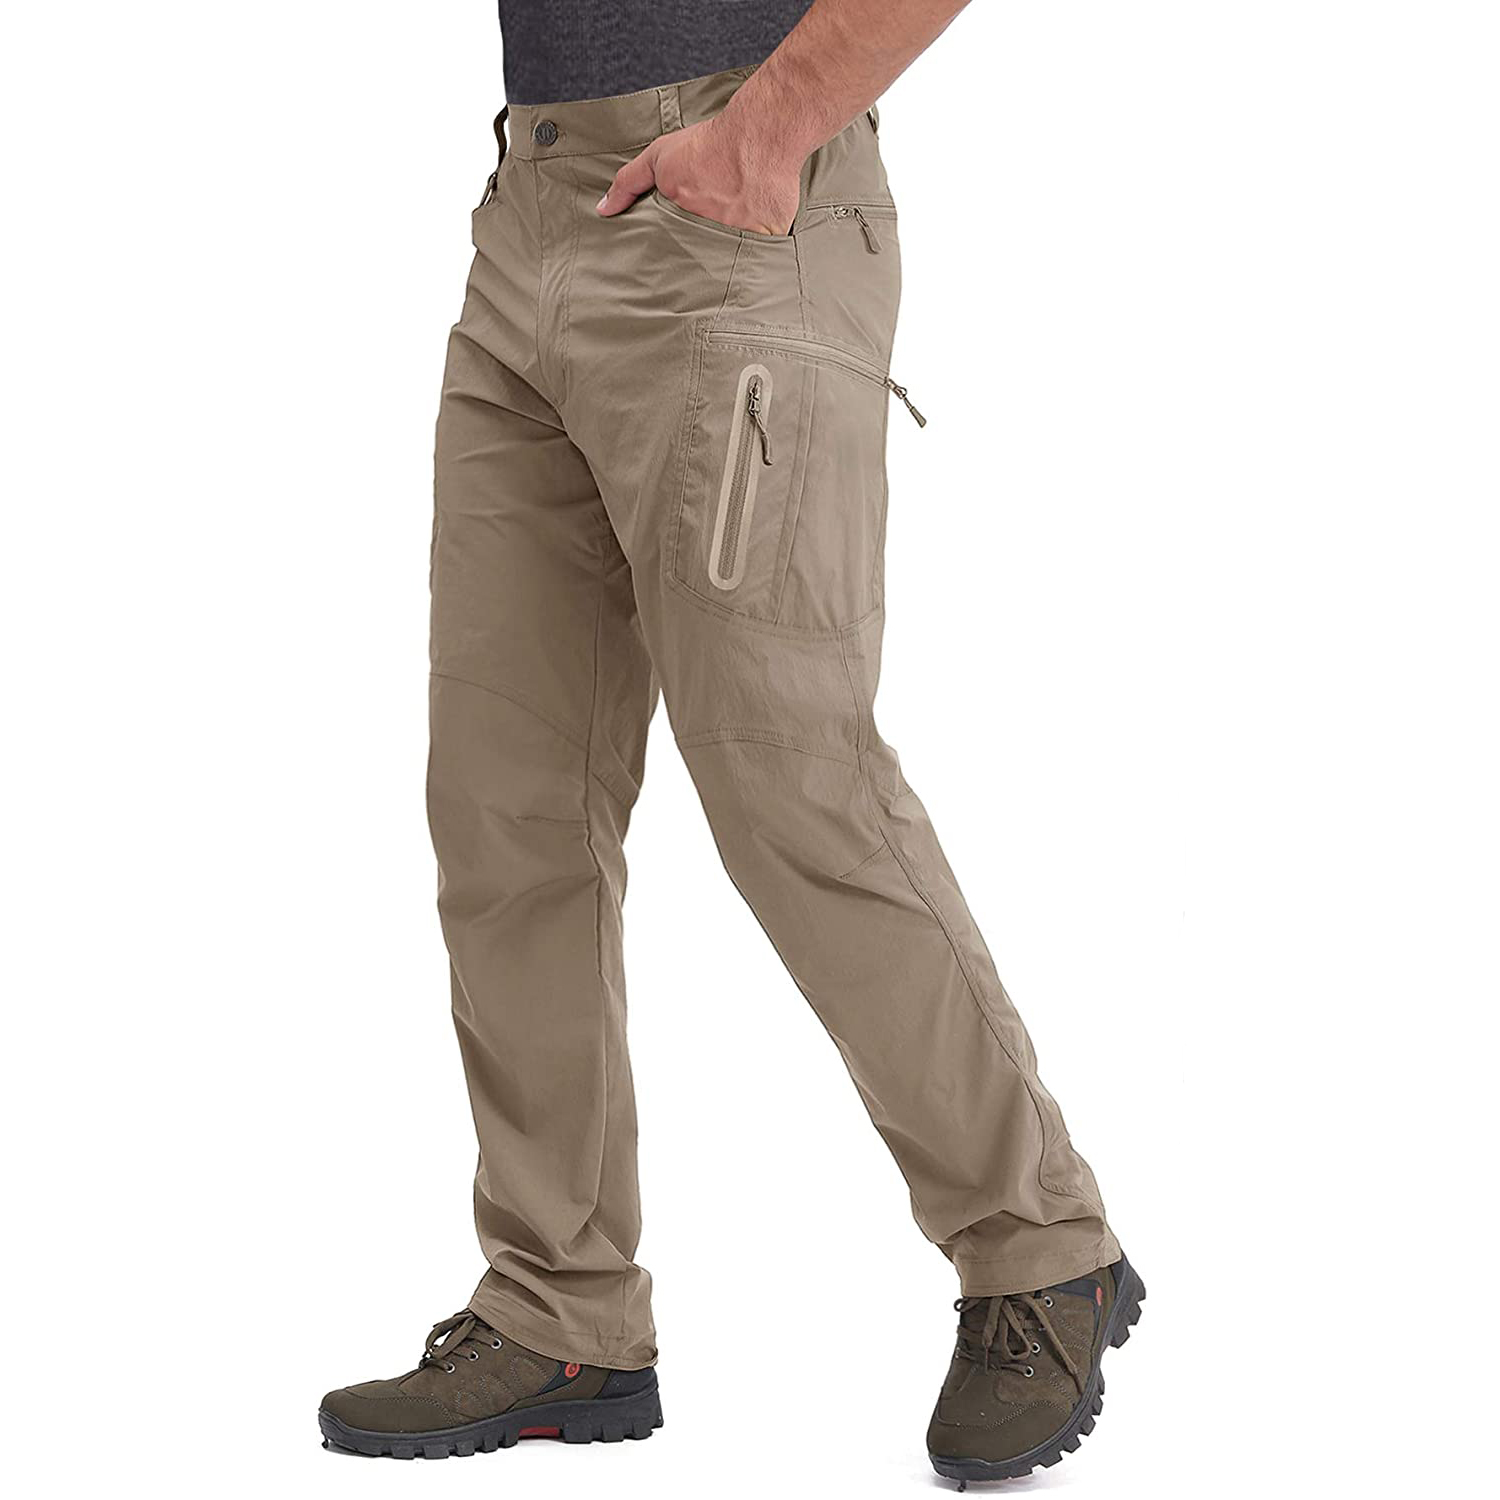 Amazon.com : FREE SOLDIER Men's Outdoor Cargo Hiking Pants with Belt  Lightweight Waterproof Quick Dry Tactical Pants Nylon Spandex (Mud 30W/28L)  : Clothing, Shoes & Jewelry